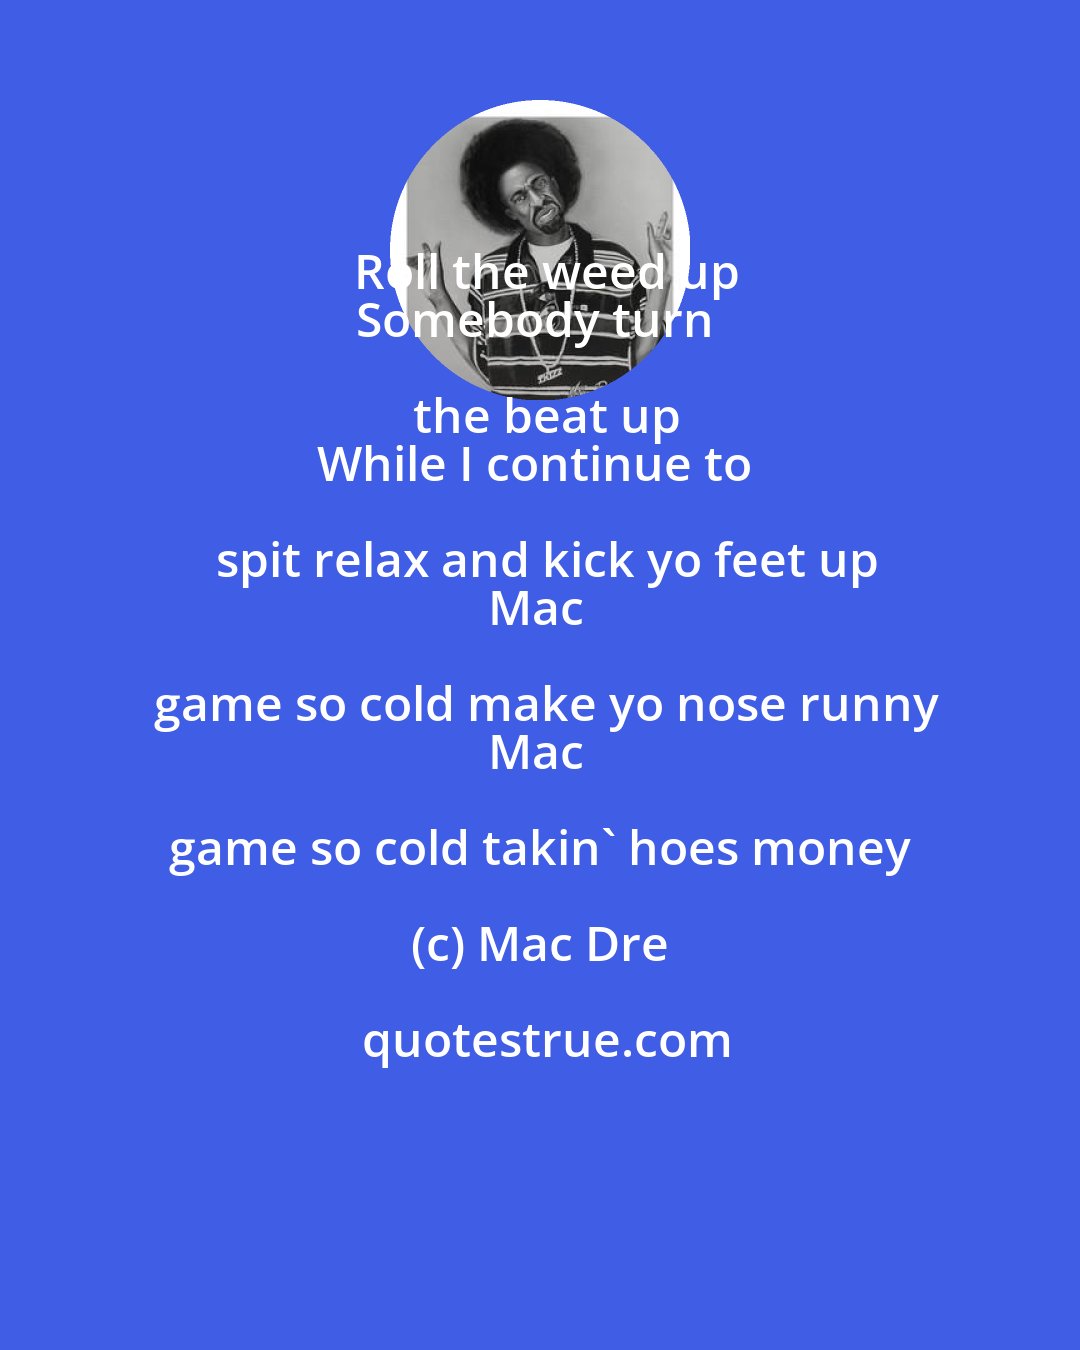 Mac Dre: Roll the weed up
Somebody turn the beat up
While I continue to spit relax and kick yo feet up
Mac game so cold make yo nose runny
Mac game so cold takin' hoes money